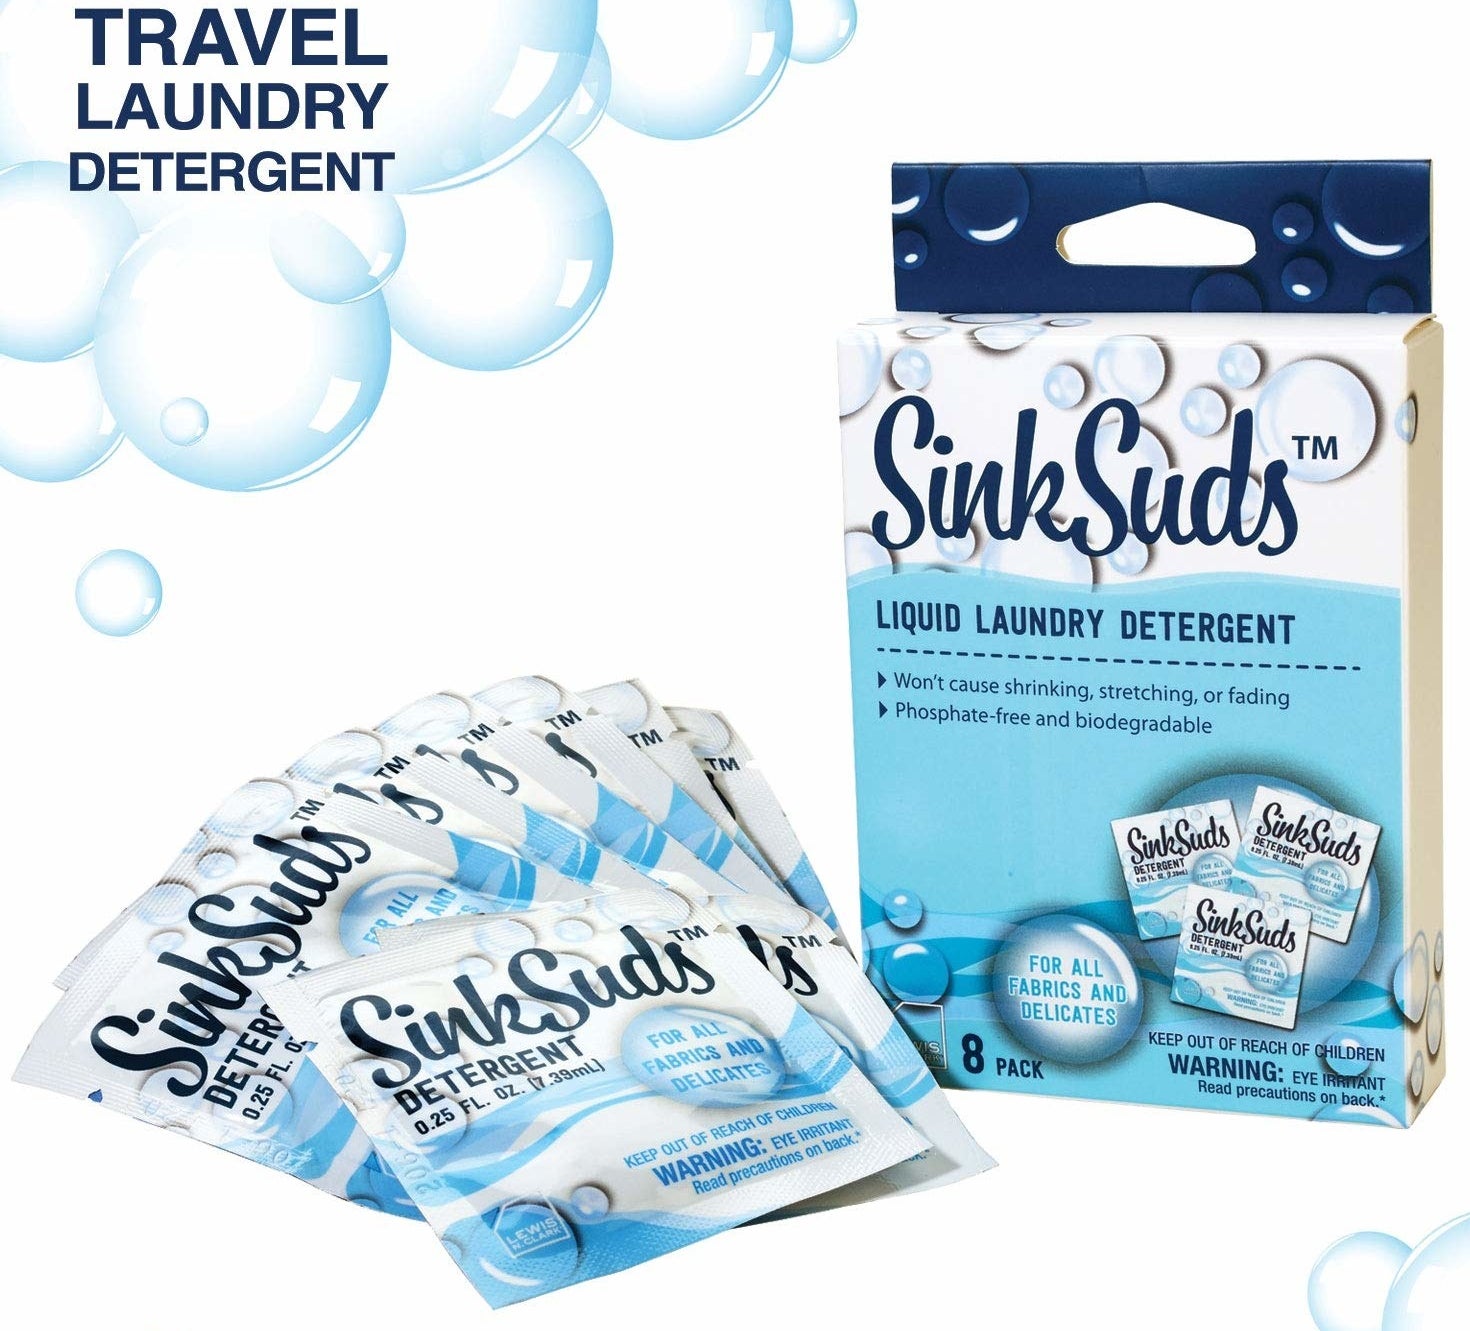 The box and packets of Sink Suds detergent